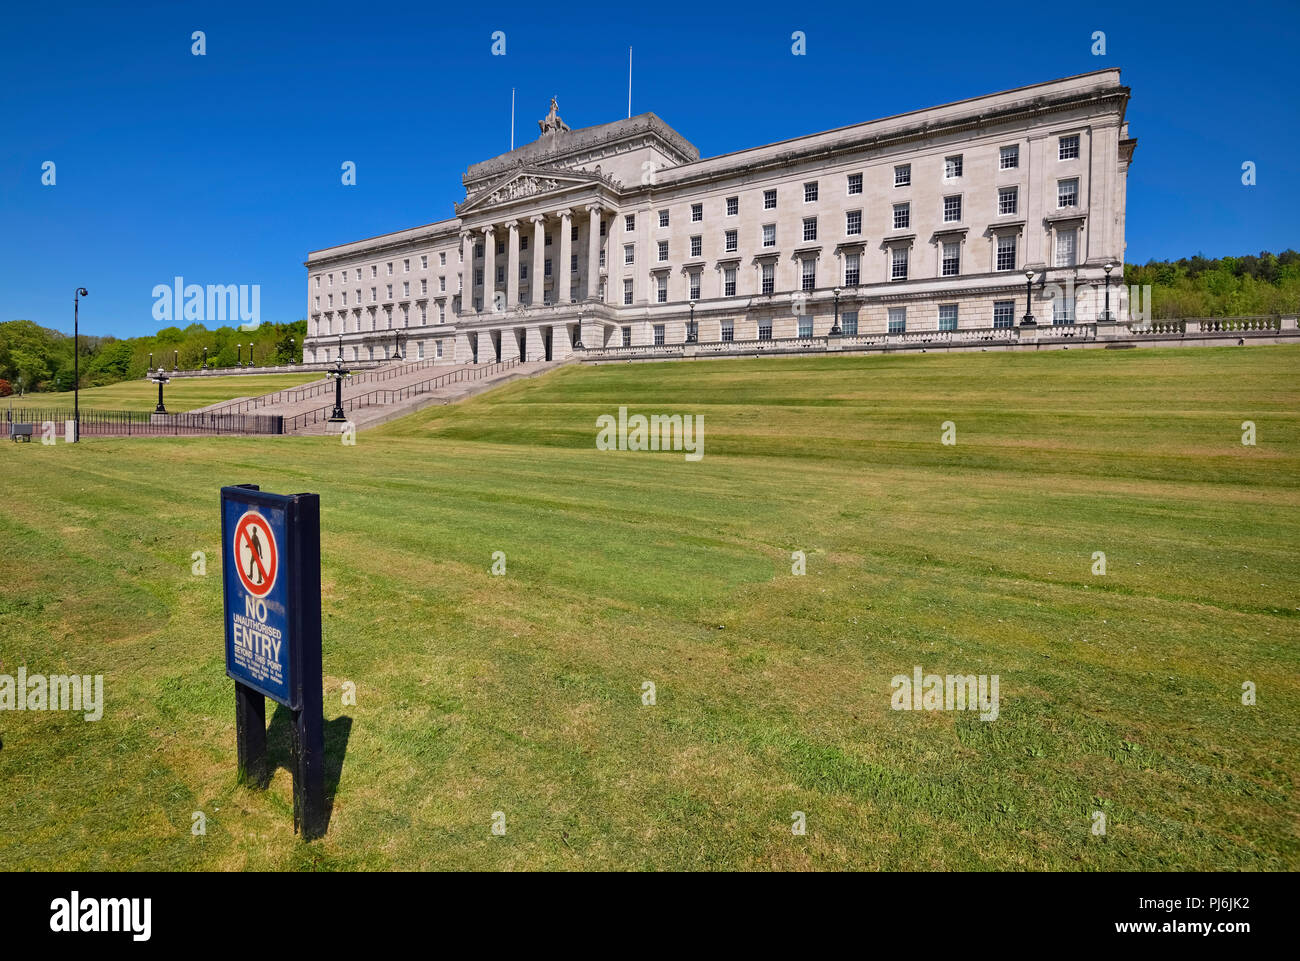 Northern Ireland, Belfast, Stormont, Parliament or Northern Ireland Assembly Buildings with No Entry sign in the foreground. Stock Photo